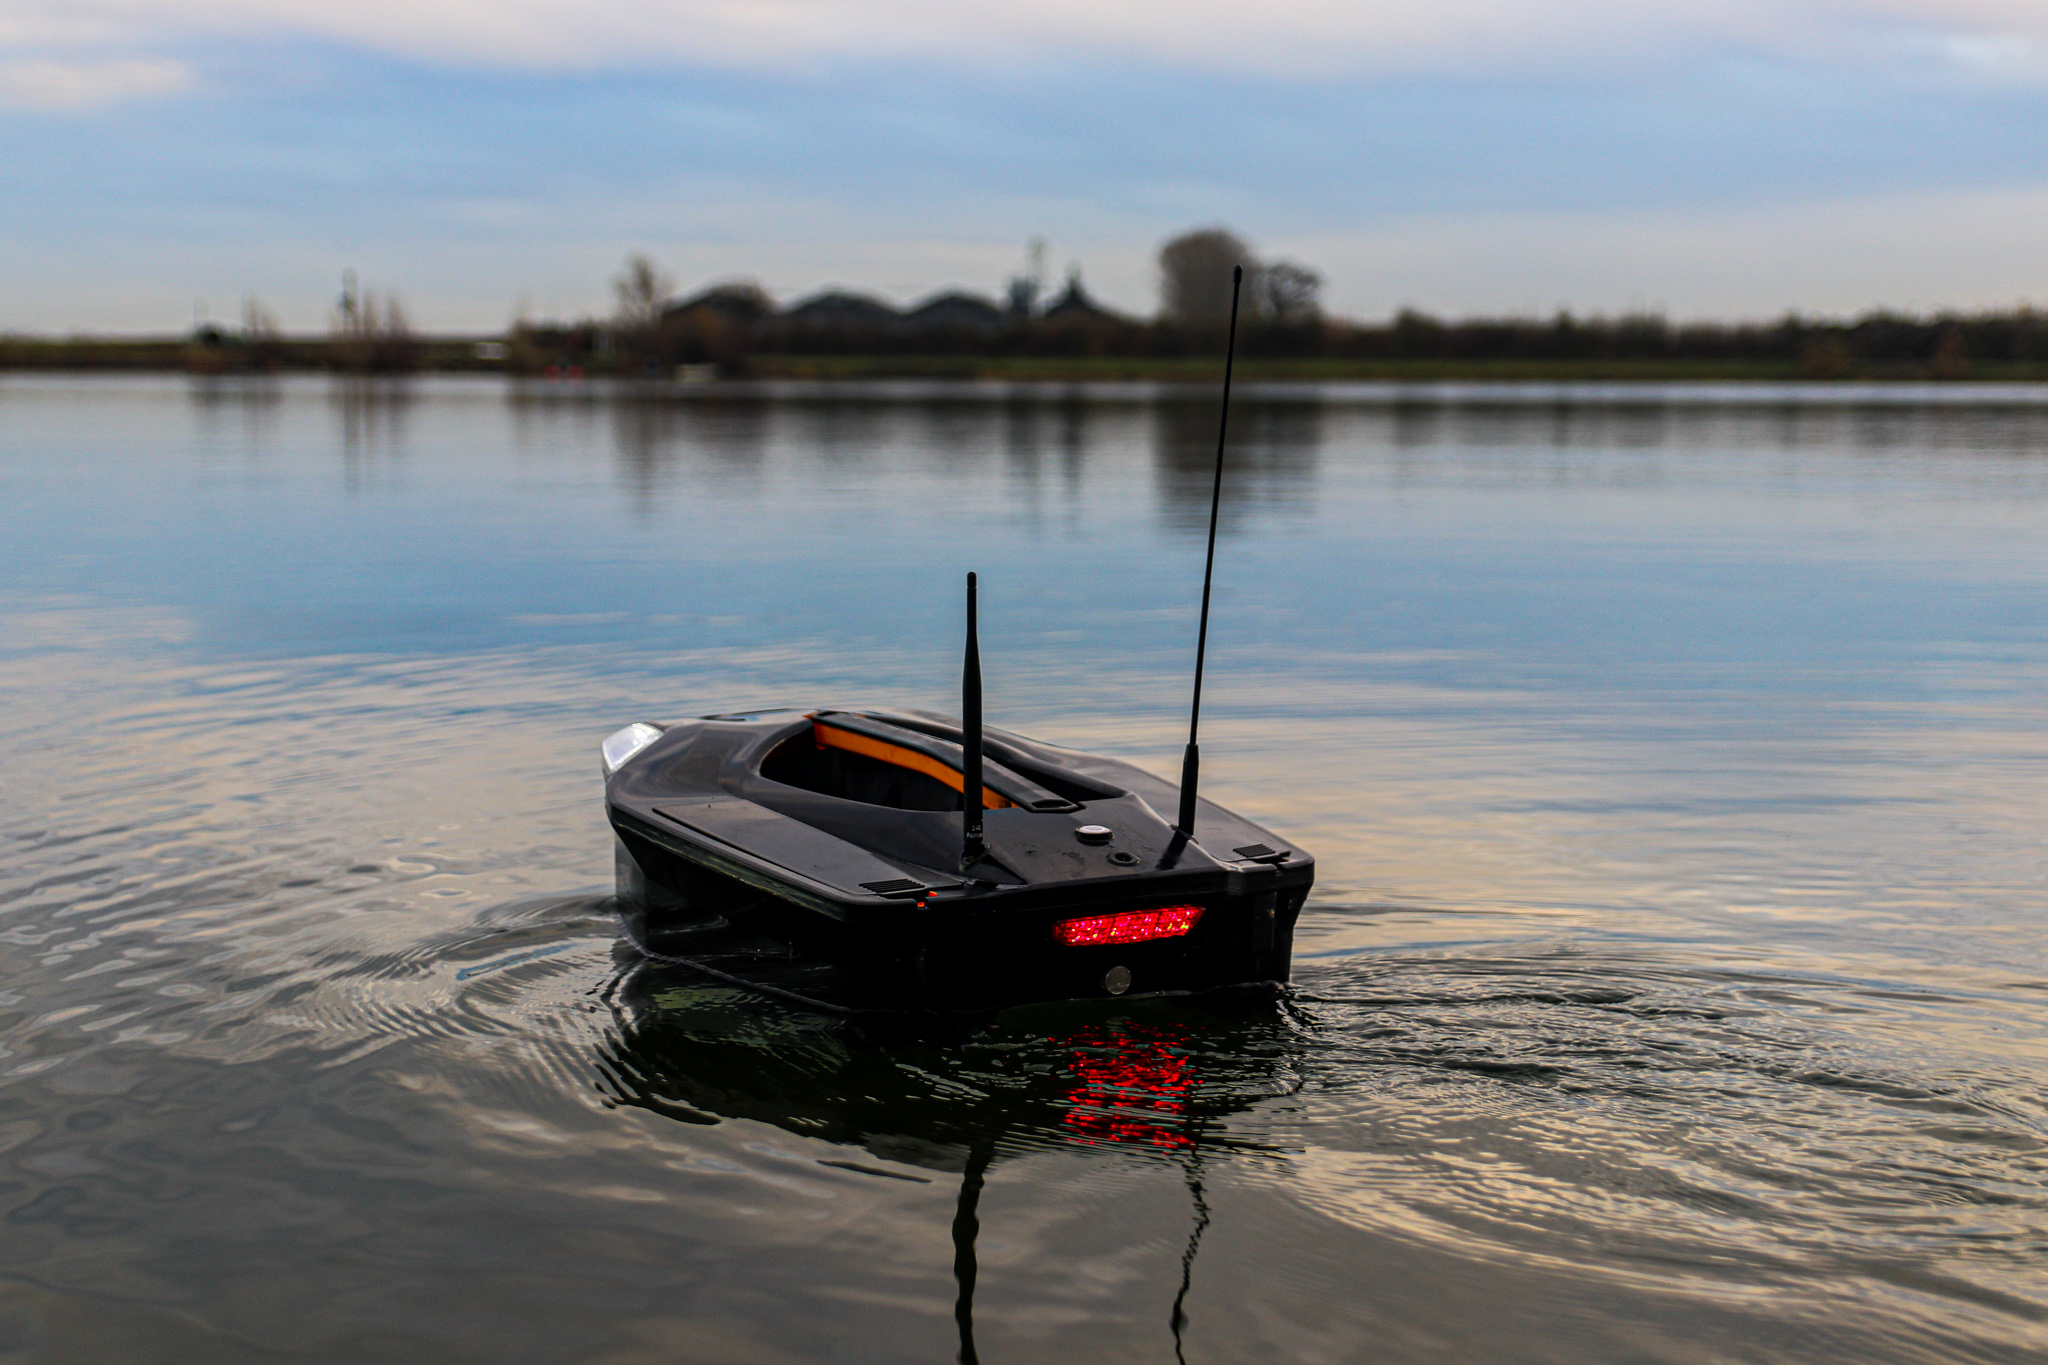 The 10 Best Bait Boats With Fishfinders & GPS